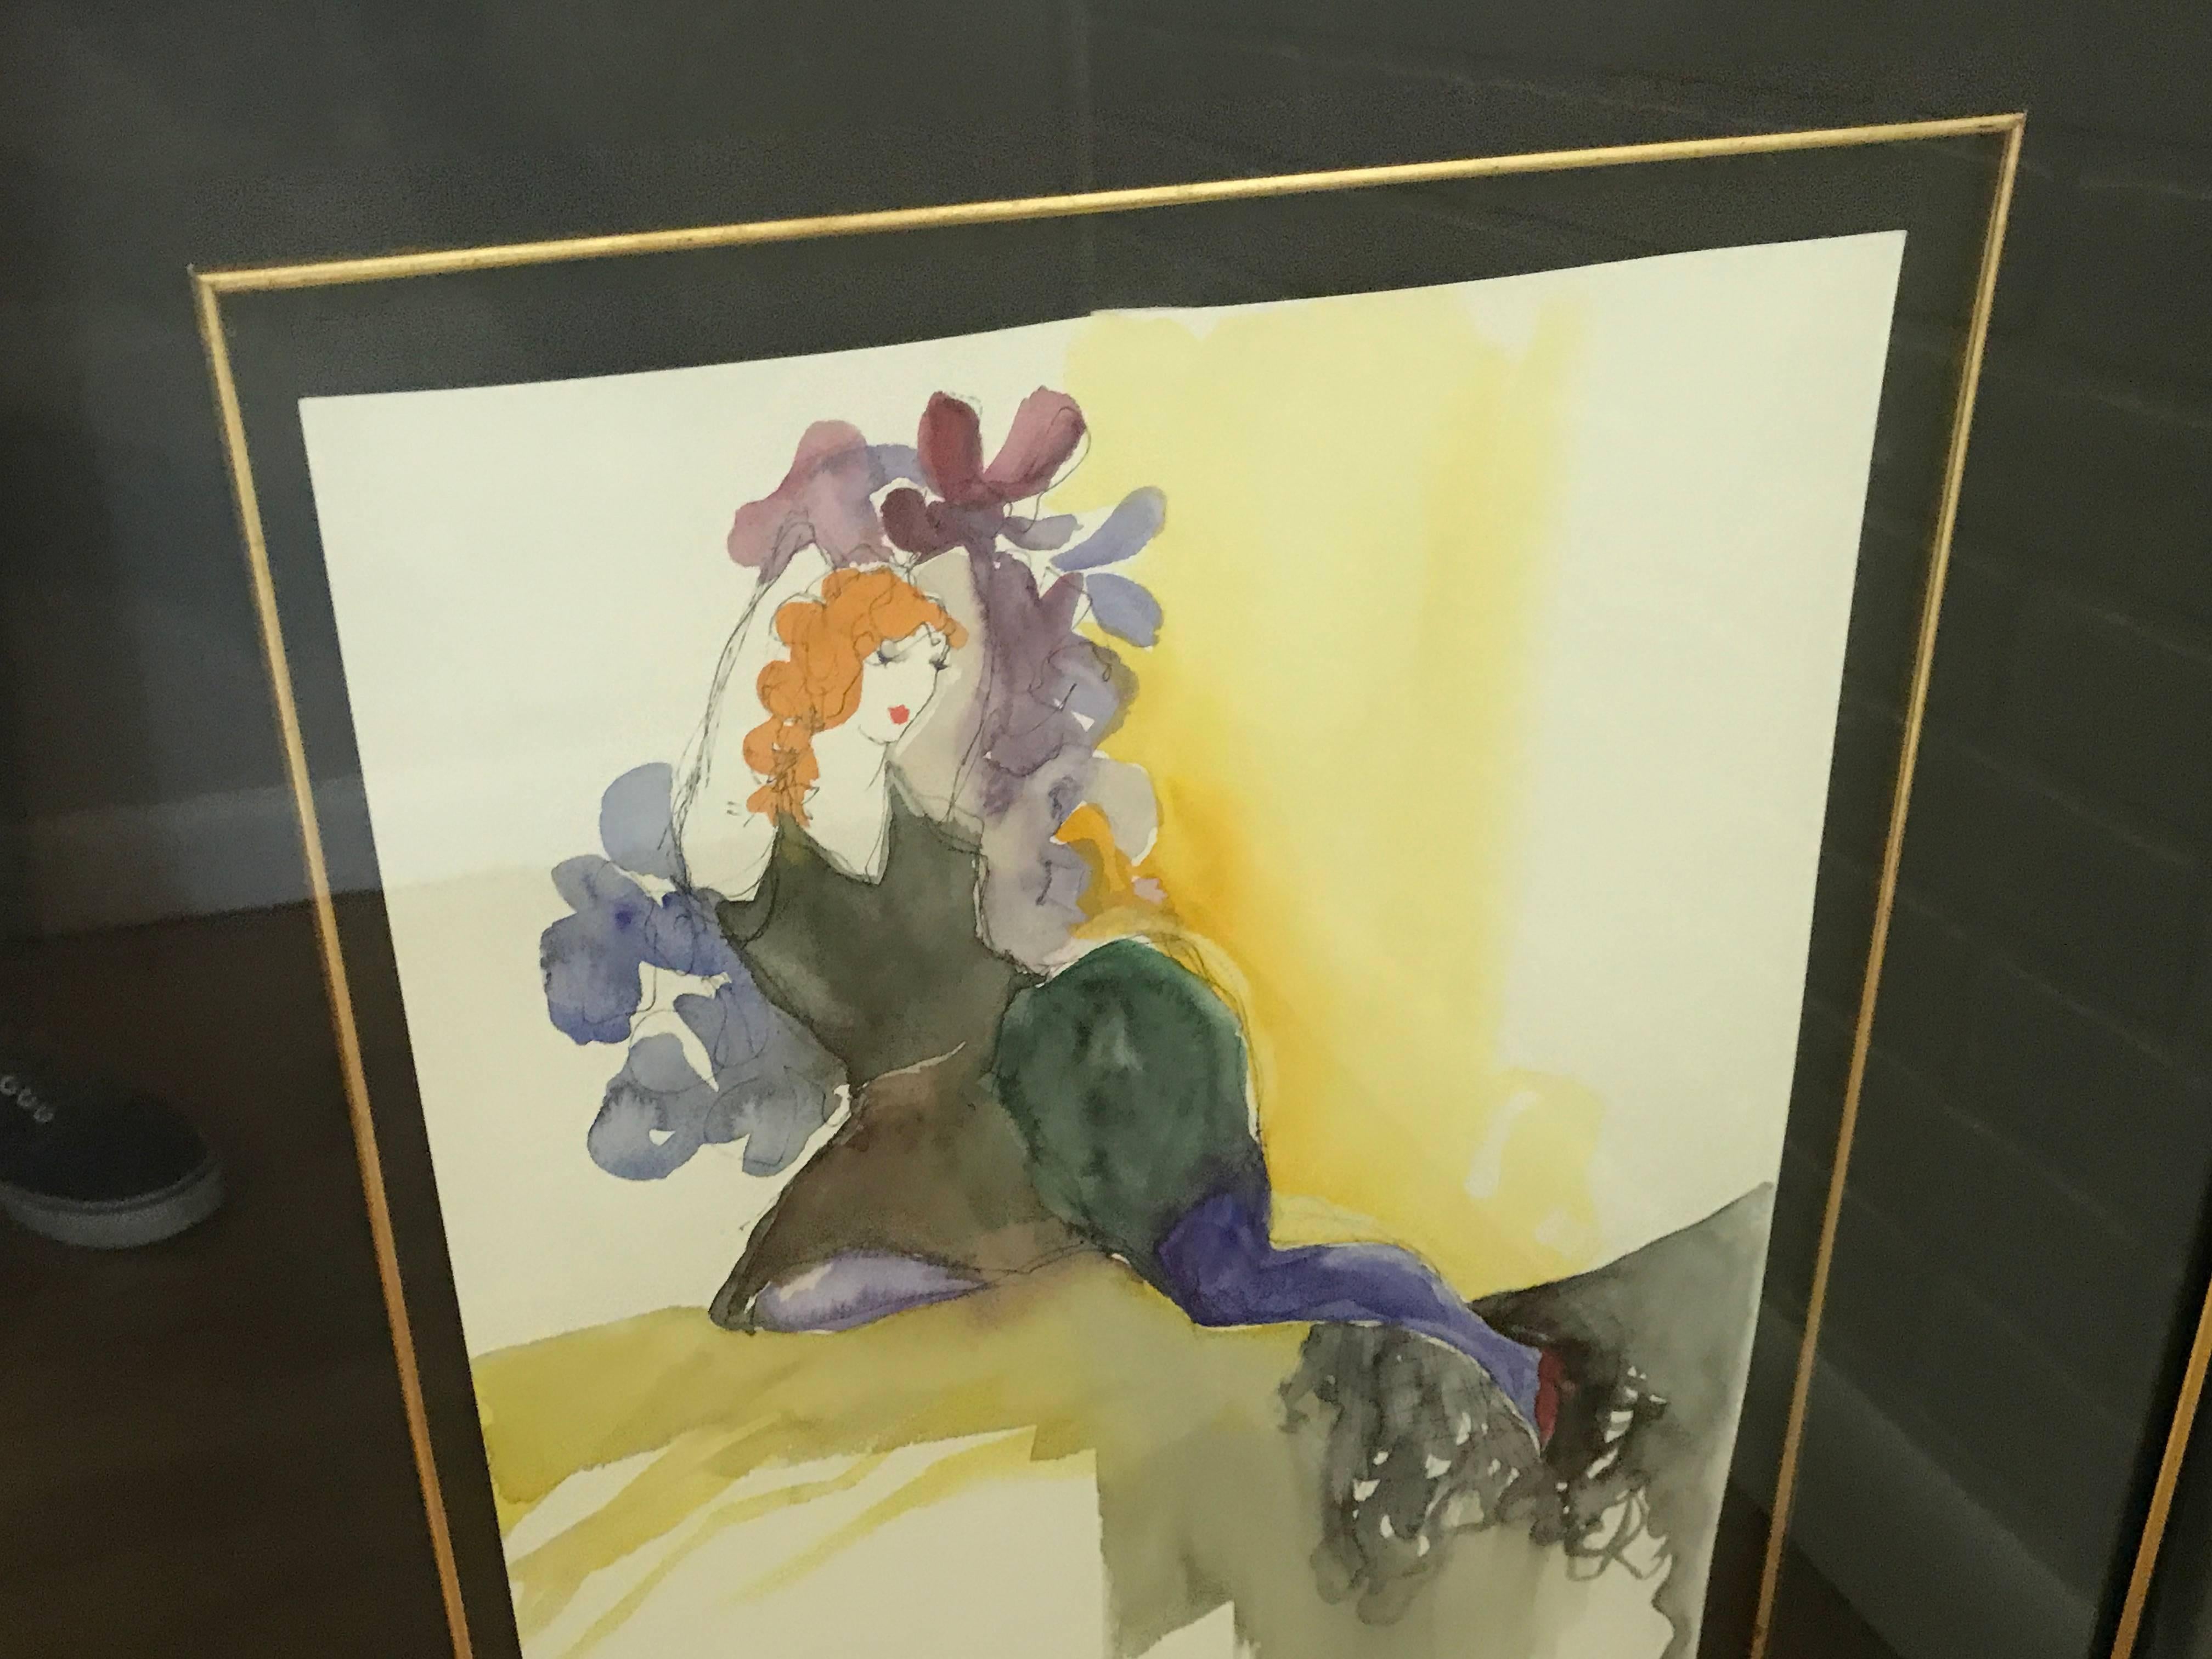 Offered is a gorgeous, original 1970's/1980's Itzchak Tarkay abstract watercolor painting of a reclined woman. The piece is titled 